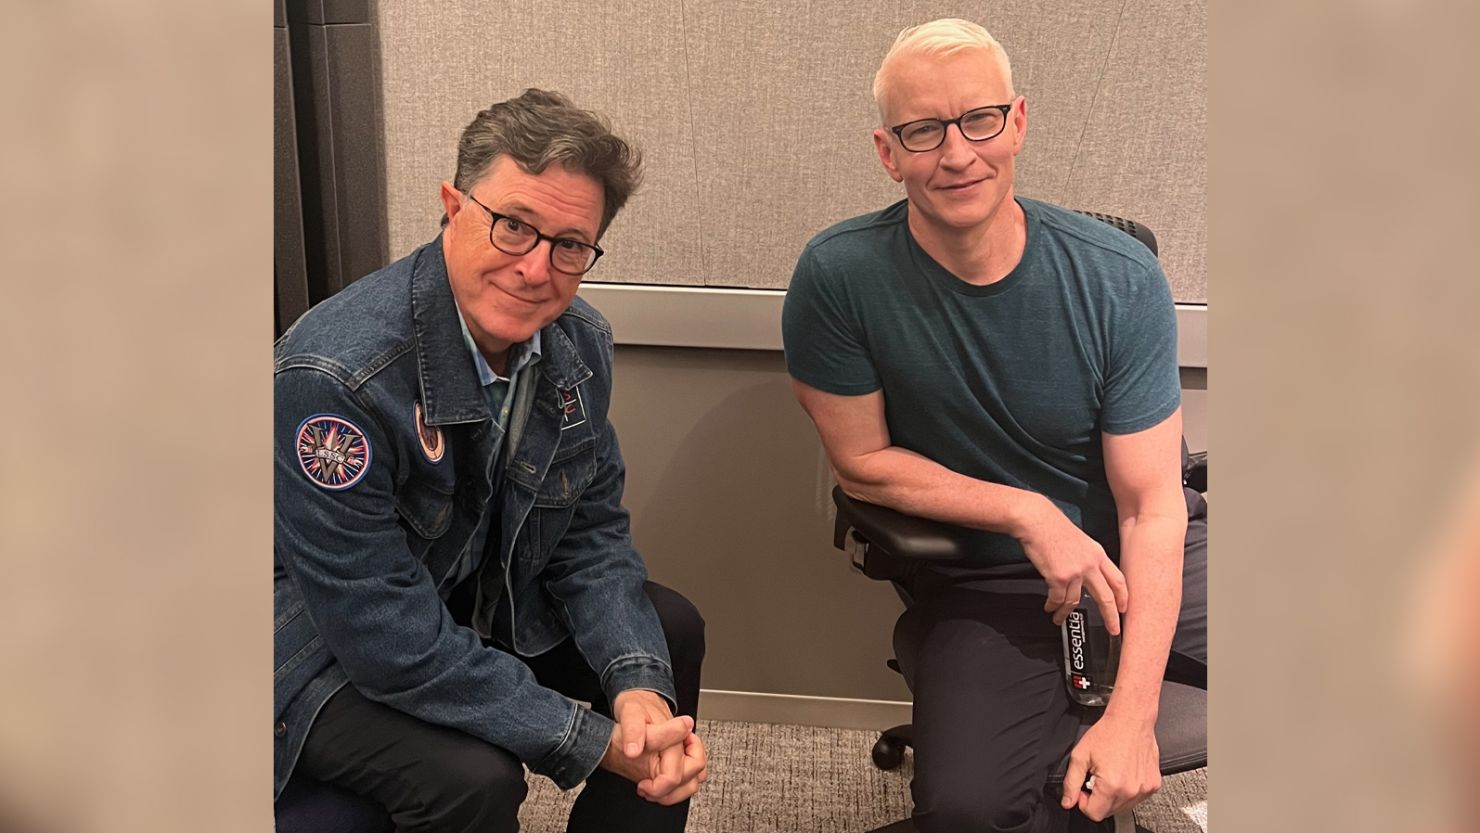 (From left) "The Late Show" host Stephen Colbert and CNN anchor Anderson Cooper discussed how losing close family members at an early age has impacted them.